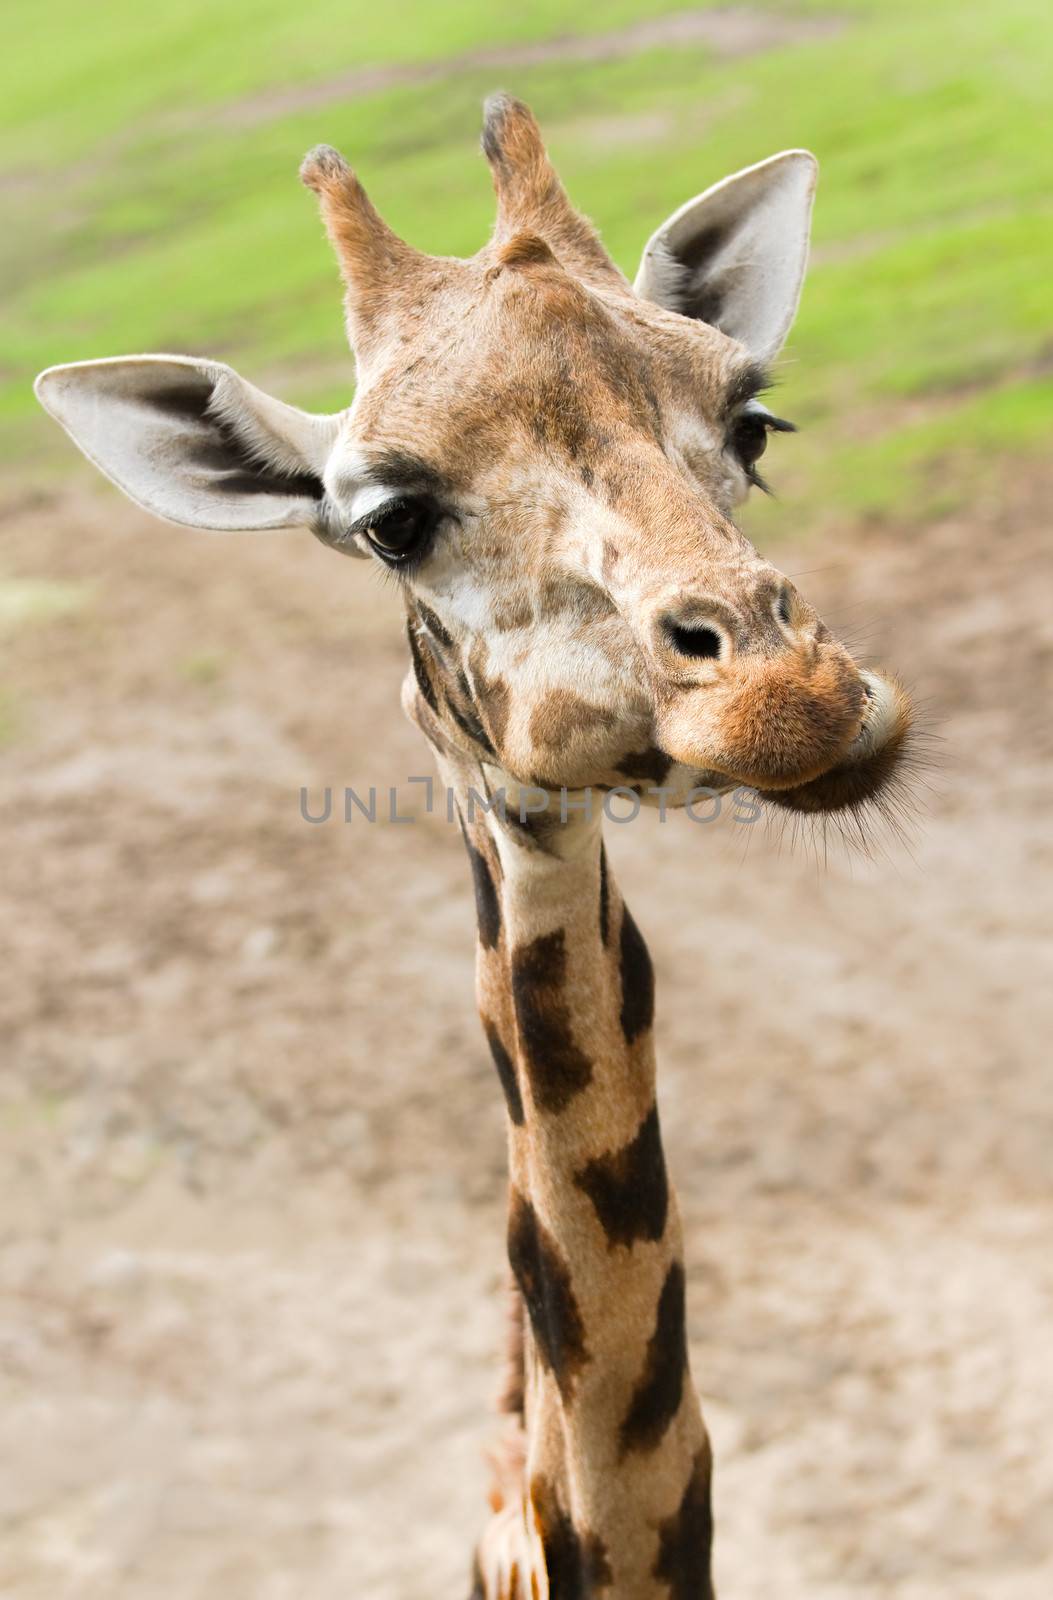 Funny giraffe with long thin neck in close view